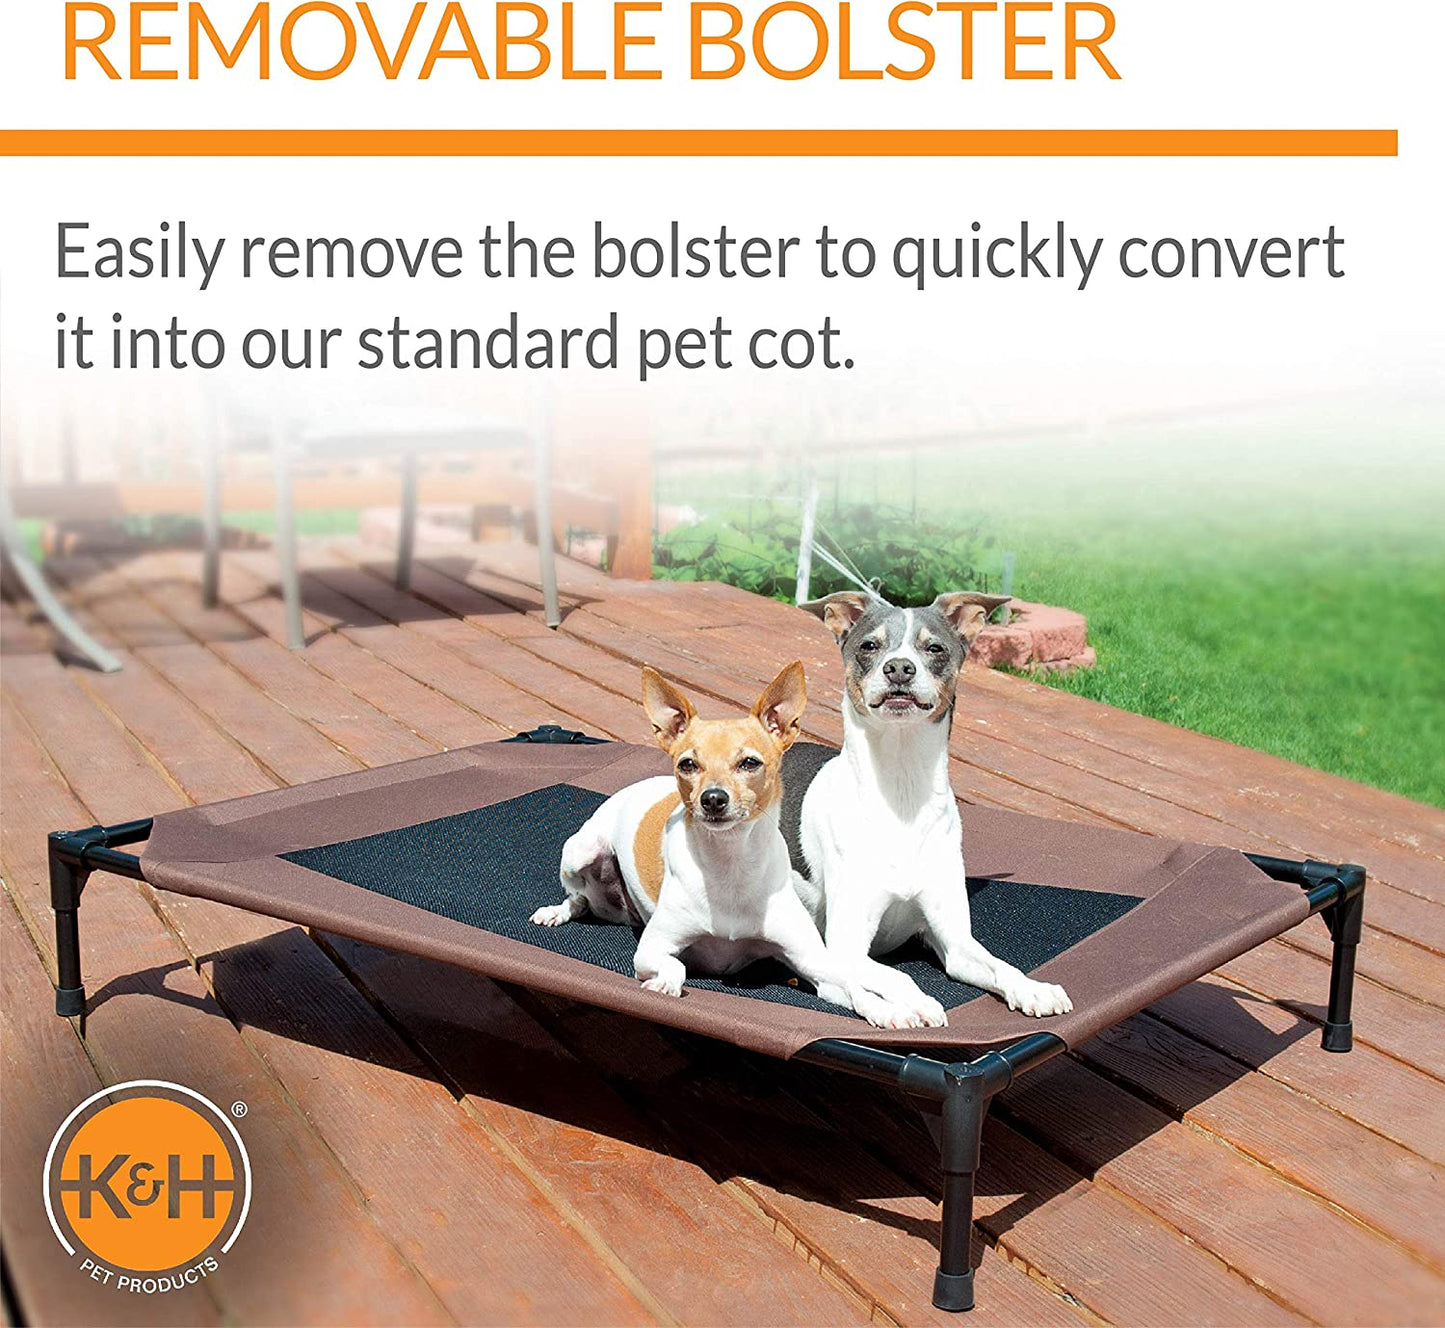 K&H Pet Products Original Bolster Pet Cot Outdoor Elevated Dog Bed with Removable Bolsters - Chocolate/Black Mesh, Large 30 X 42 X 7 Inches